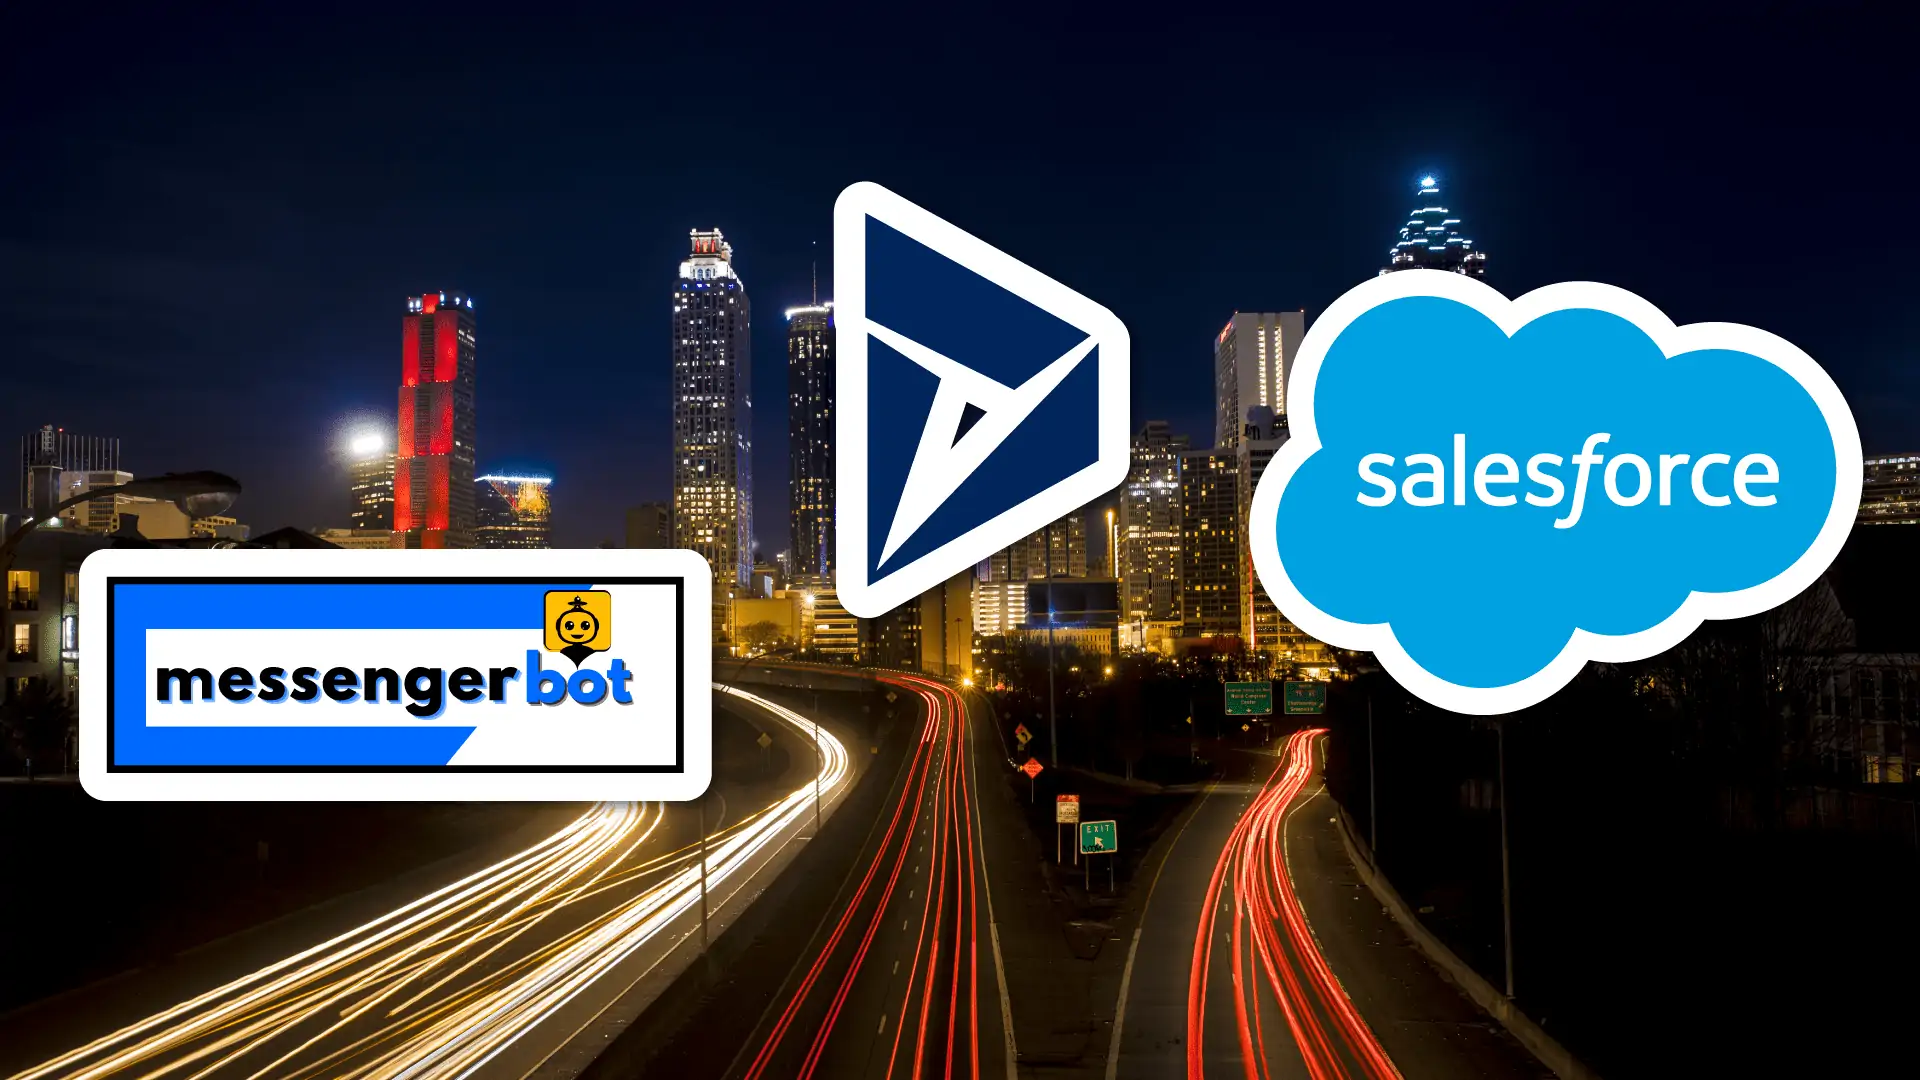 Microsoft dynamics vs salesforce,Microsoft dynamics vs salesforce vs messenger bot,microsoft dynamics crm price,salesforce management,how to use microsoft crm dynamics,microsoft dynamics crm vs salesforce features